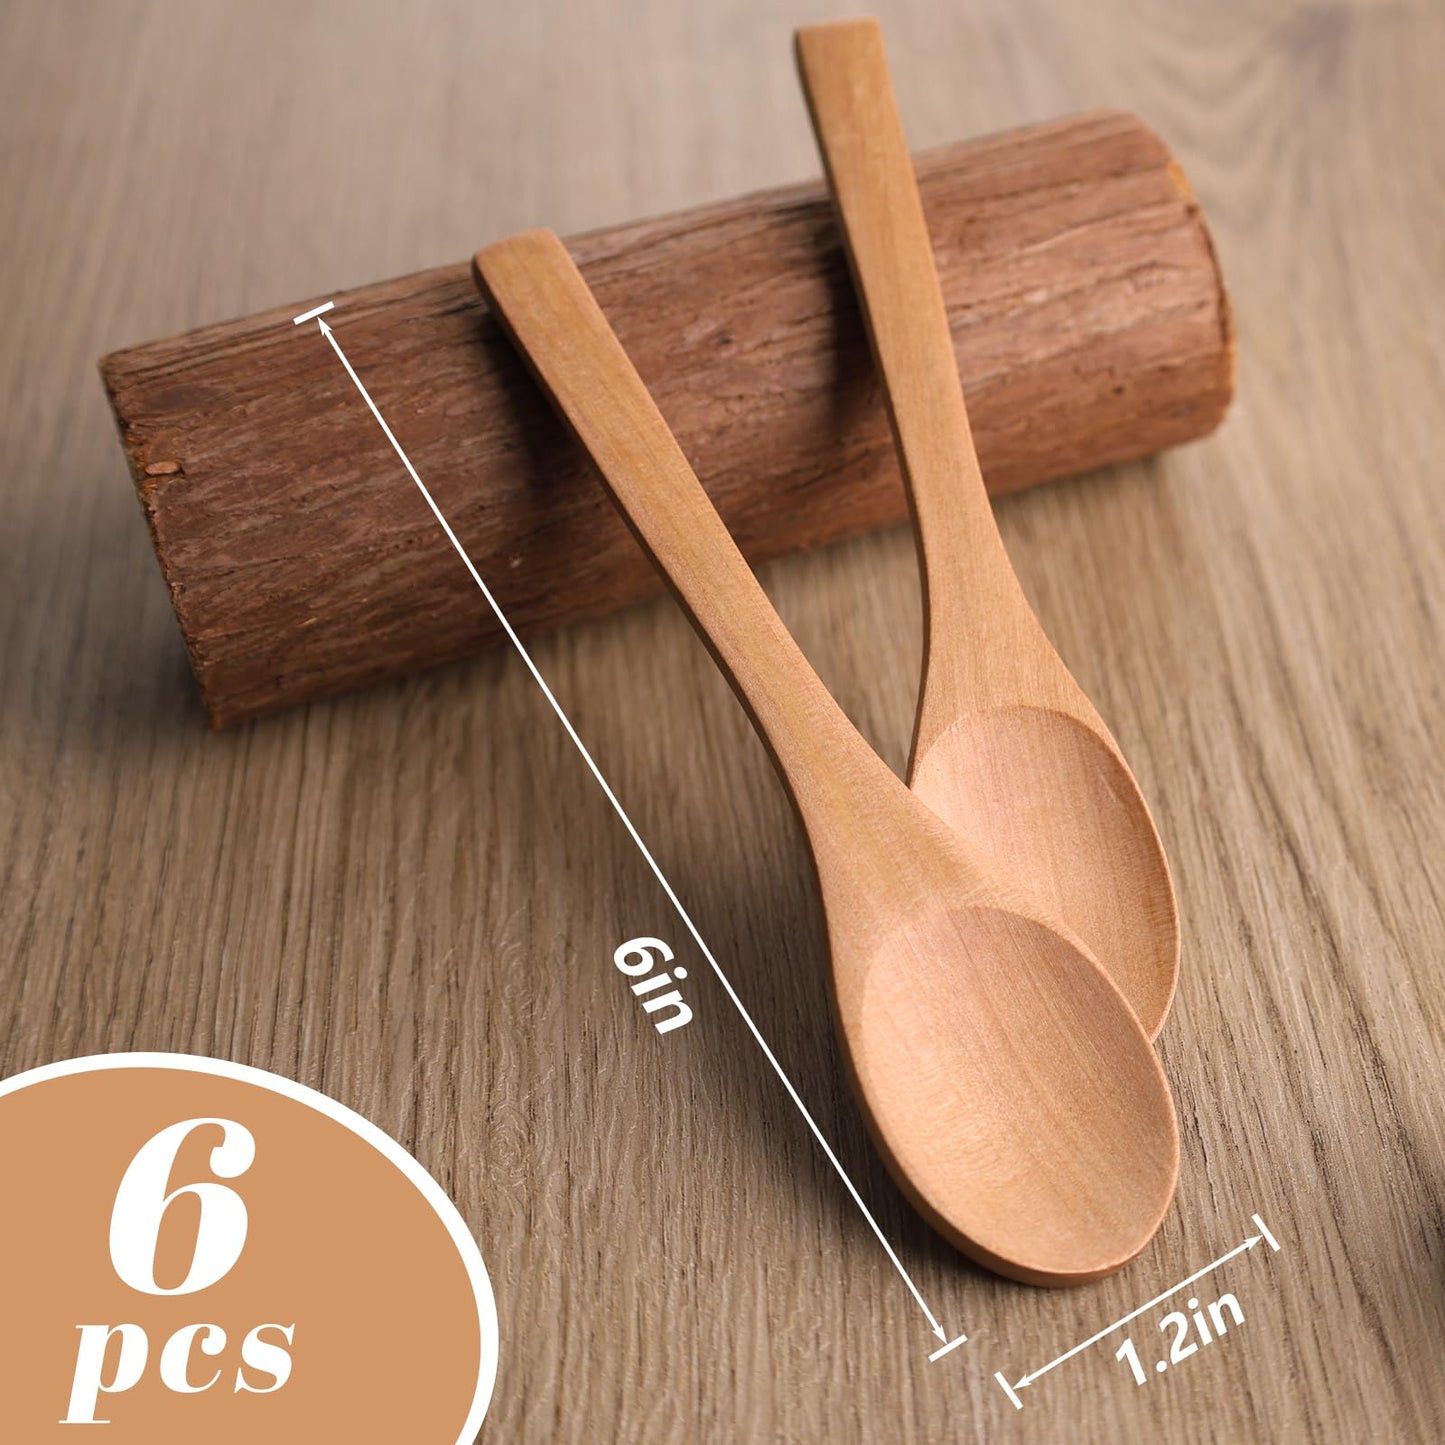 HANSGO 6PCS Small Wooden Spoons, Small Soup Spoons Serving Spoons 6inch Wooden Teaspoon for Coffee Tea Jam Bath Salts